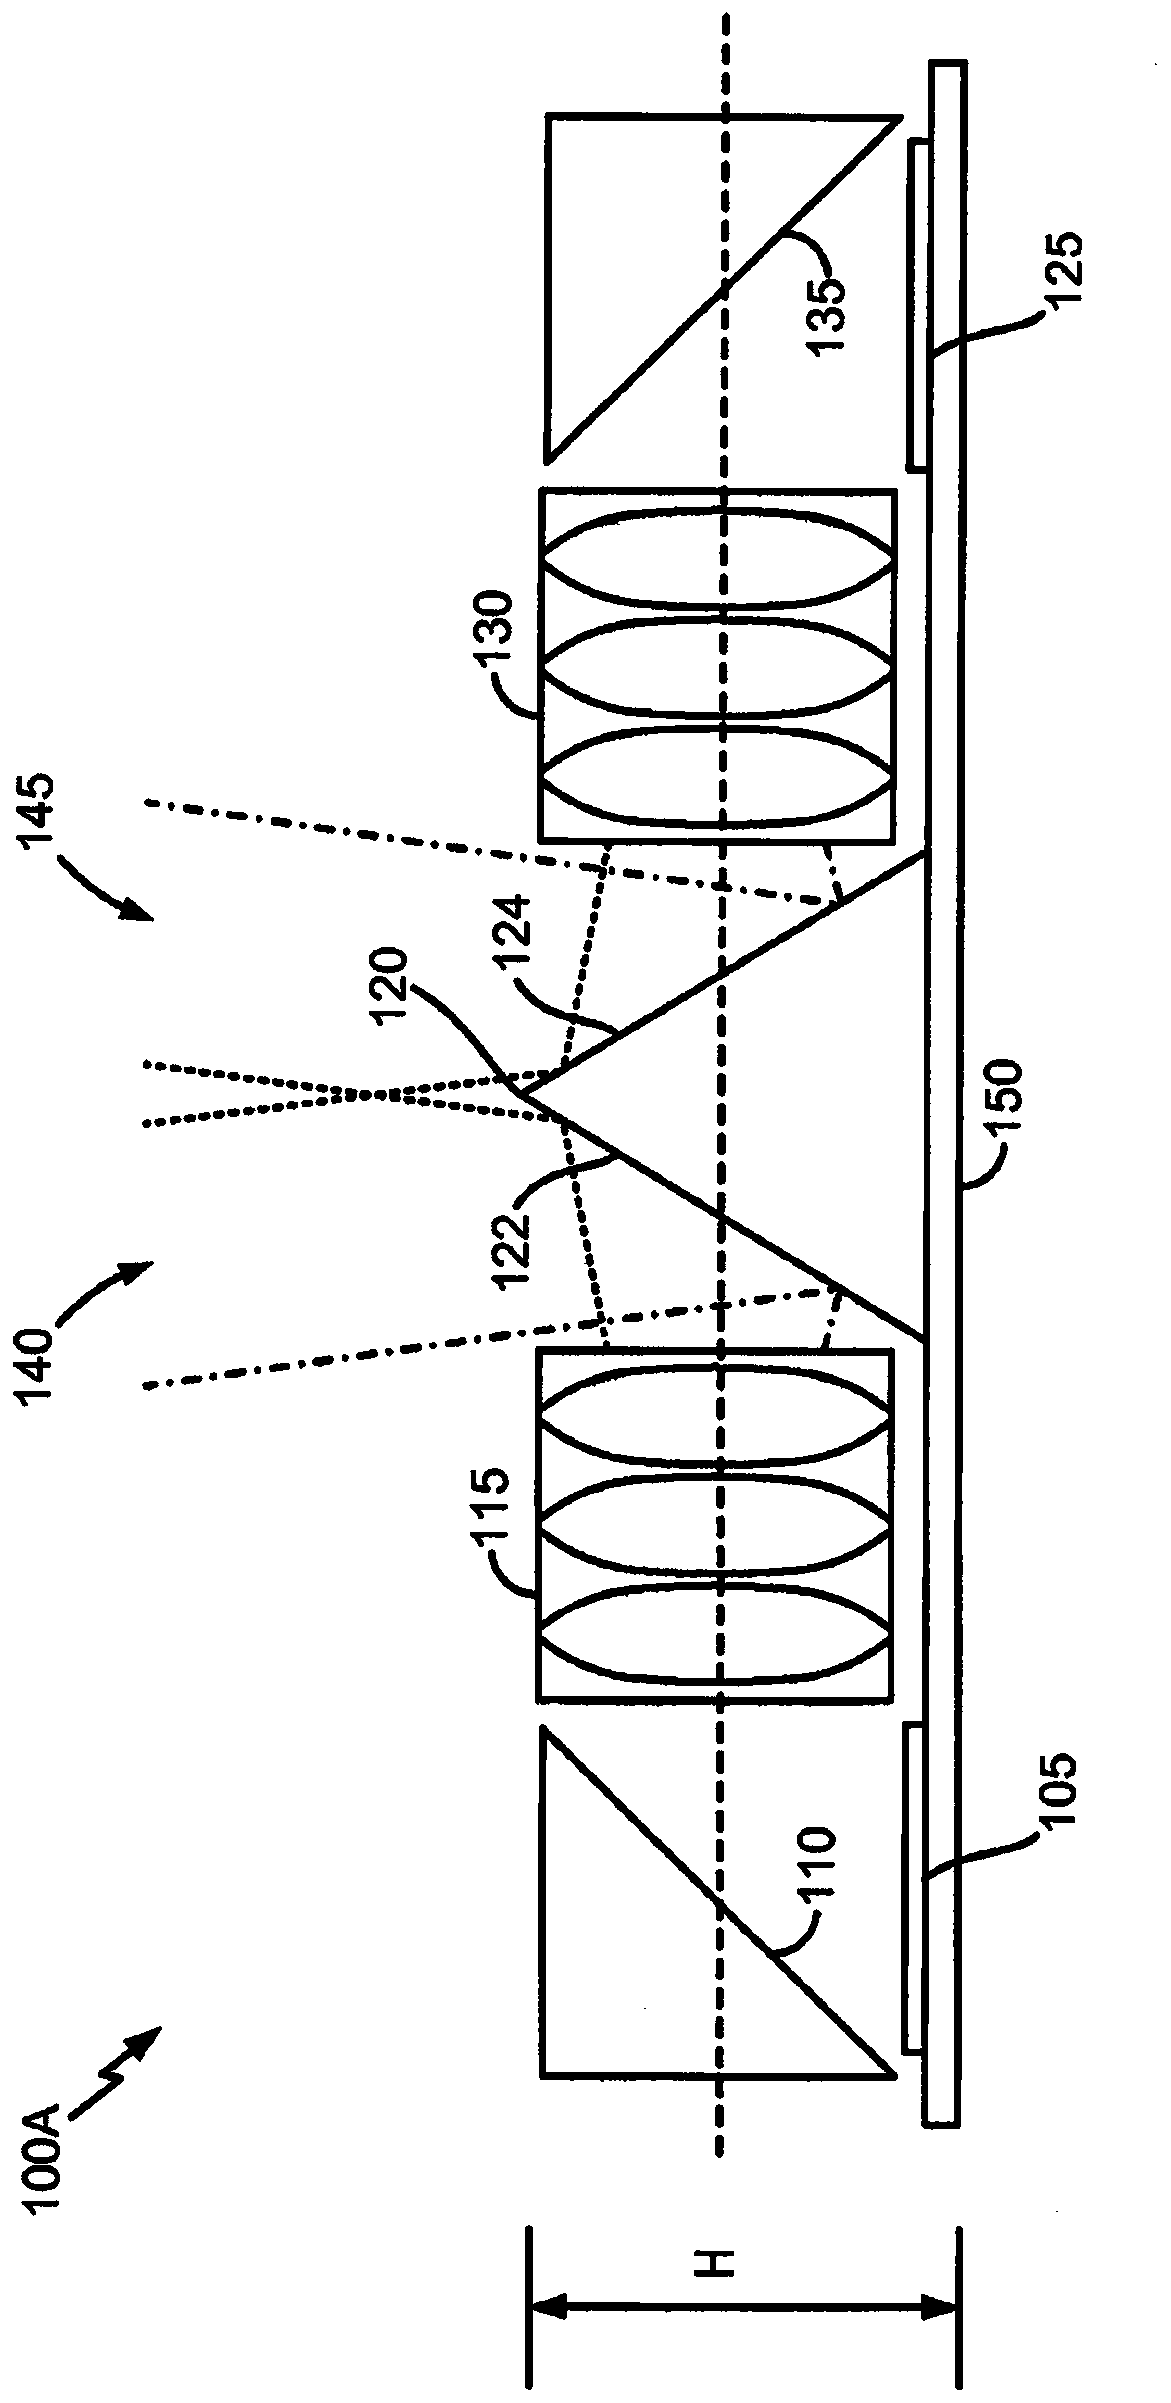 Folded Optical Array Camera Using Refracting Prisms